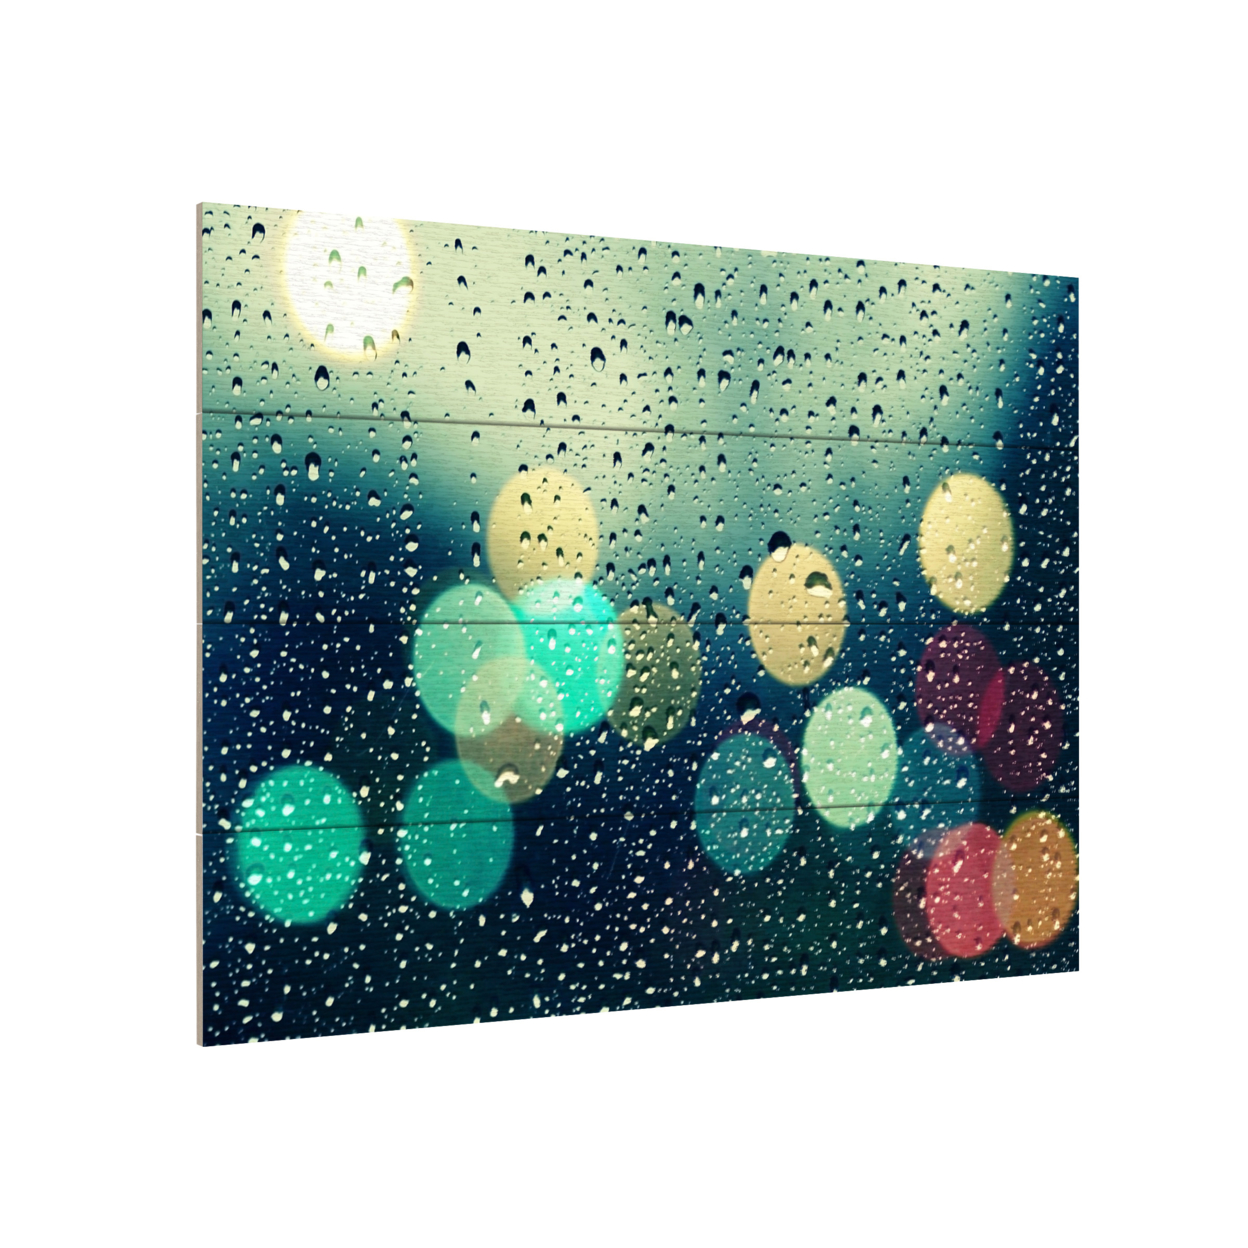 Wall Art 12 X 16 Inches Titled Rainy City Ready To Hang Printed On Wooden Planks